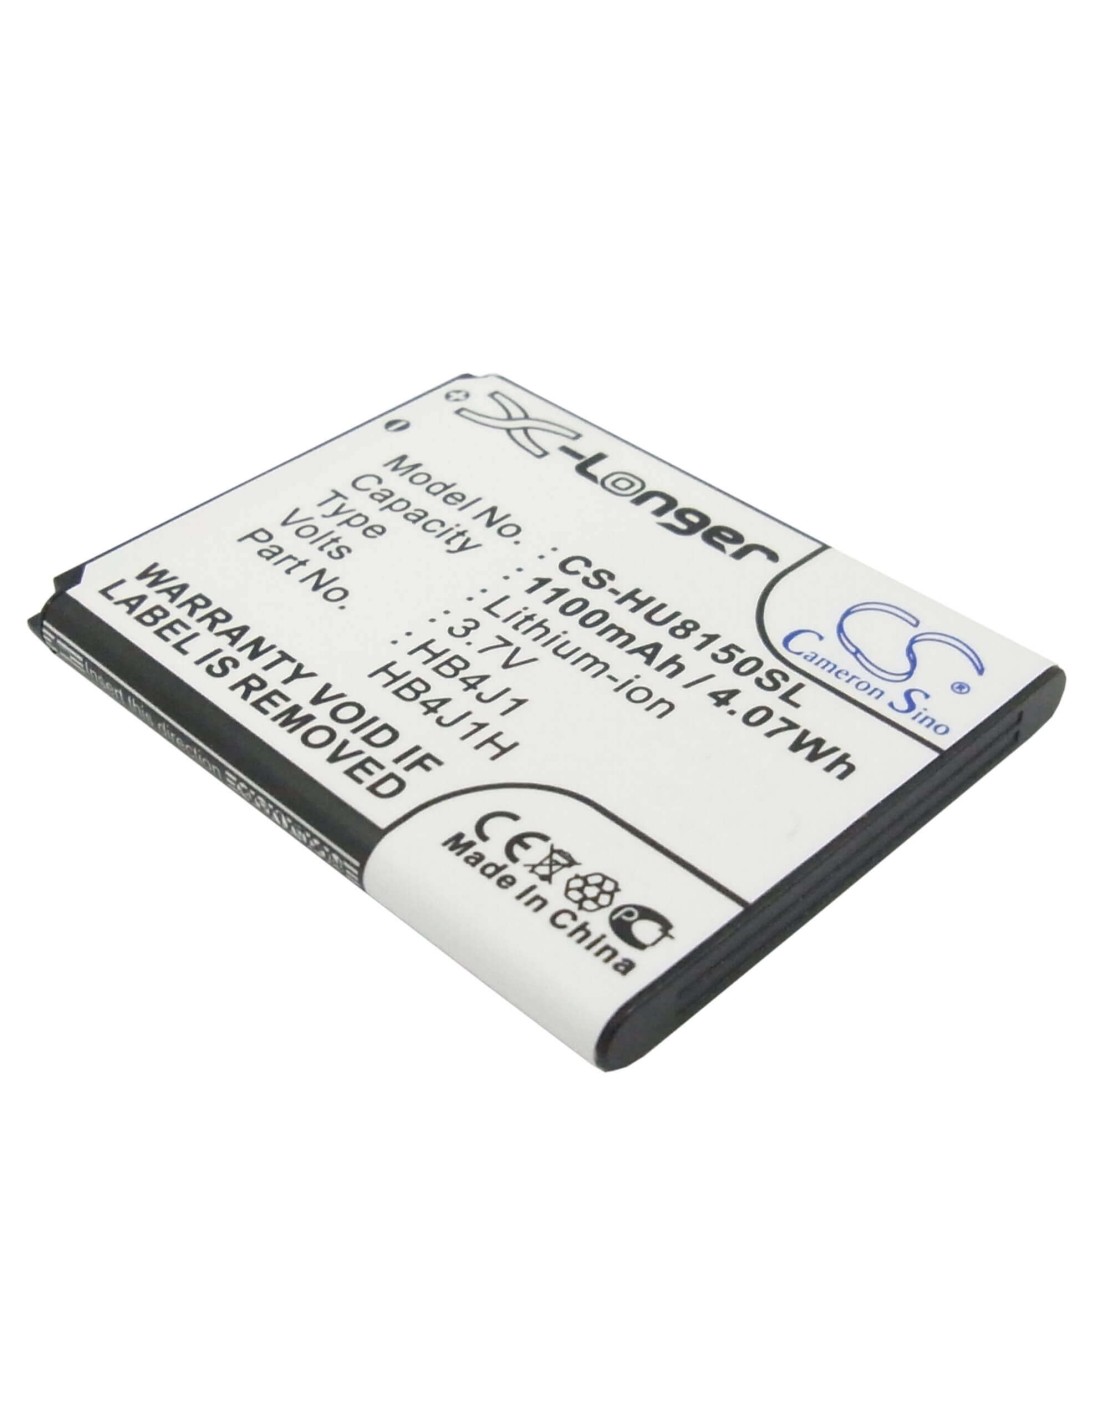 Battery for Huawei U8150, IDEOS, C8500 3.7V, 1100mAh - 4.07Wh